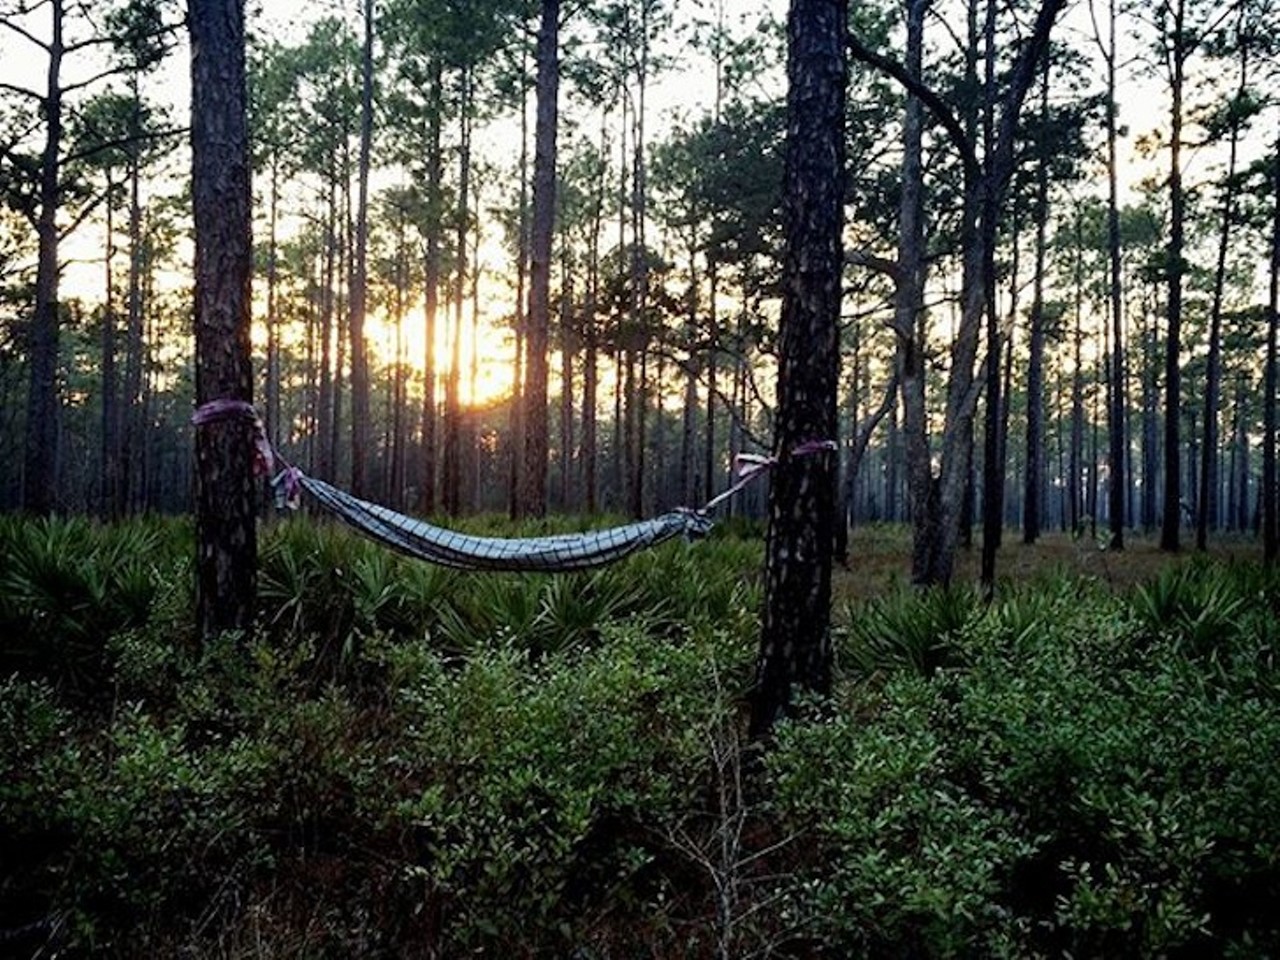 Apalachicola National Forest
Stateroad 13, Bristol, FL 32358 | (850) 643-2282 
The largest forest in Florida, Apalachicola is home to some of the state&#146;s most pristine streams, rivers, lakes and natural springs. The scenic landscape includes displays of wildflowers in the open prairies near the Apalachicola River, caverns and sinkholes in the Leon Springs and vast tropical grasslands of the Apalachee Savannahs Scenic Byway. 
Photo via goooodviiiiibes/Instagram